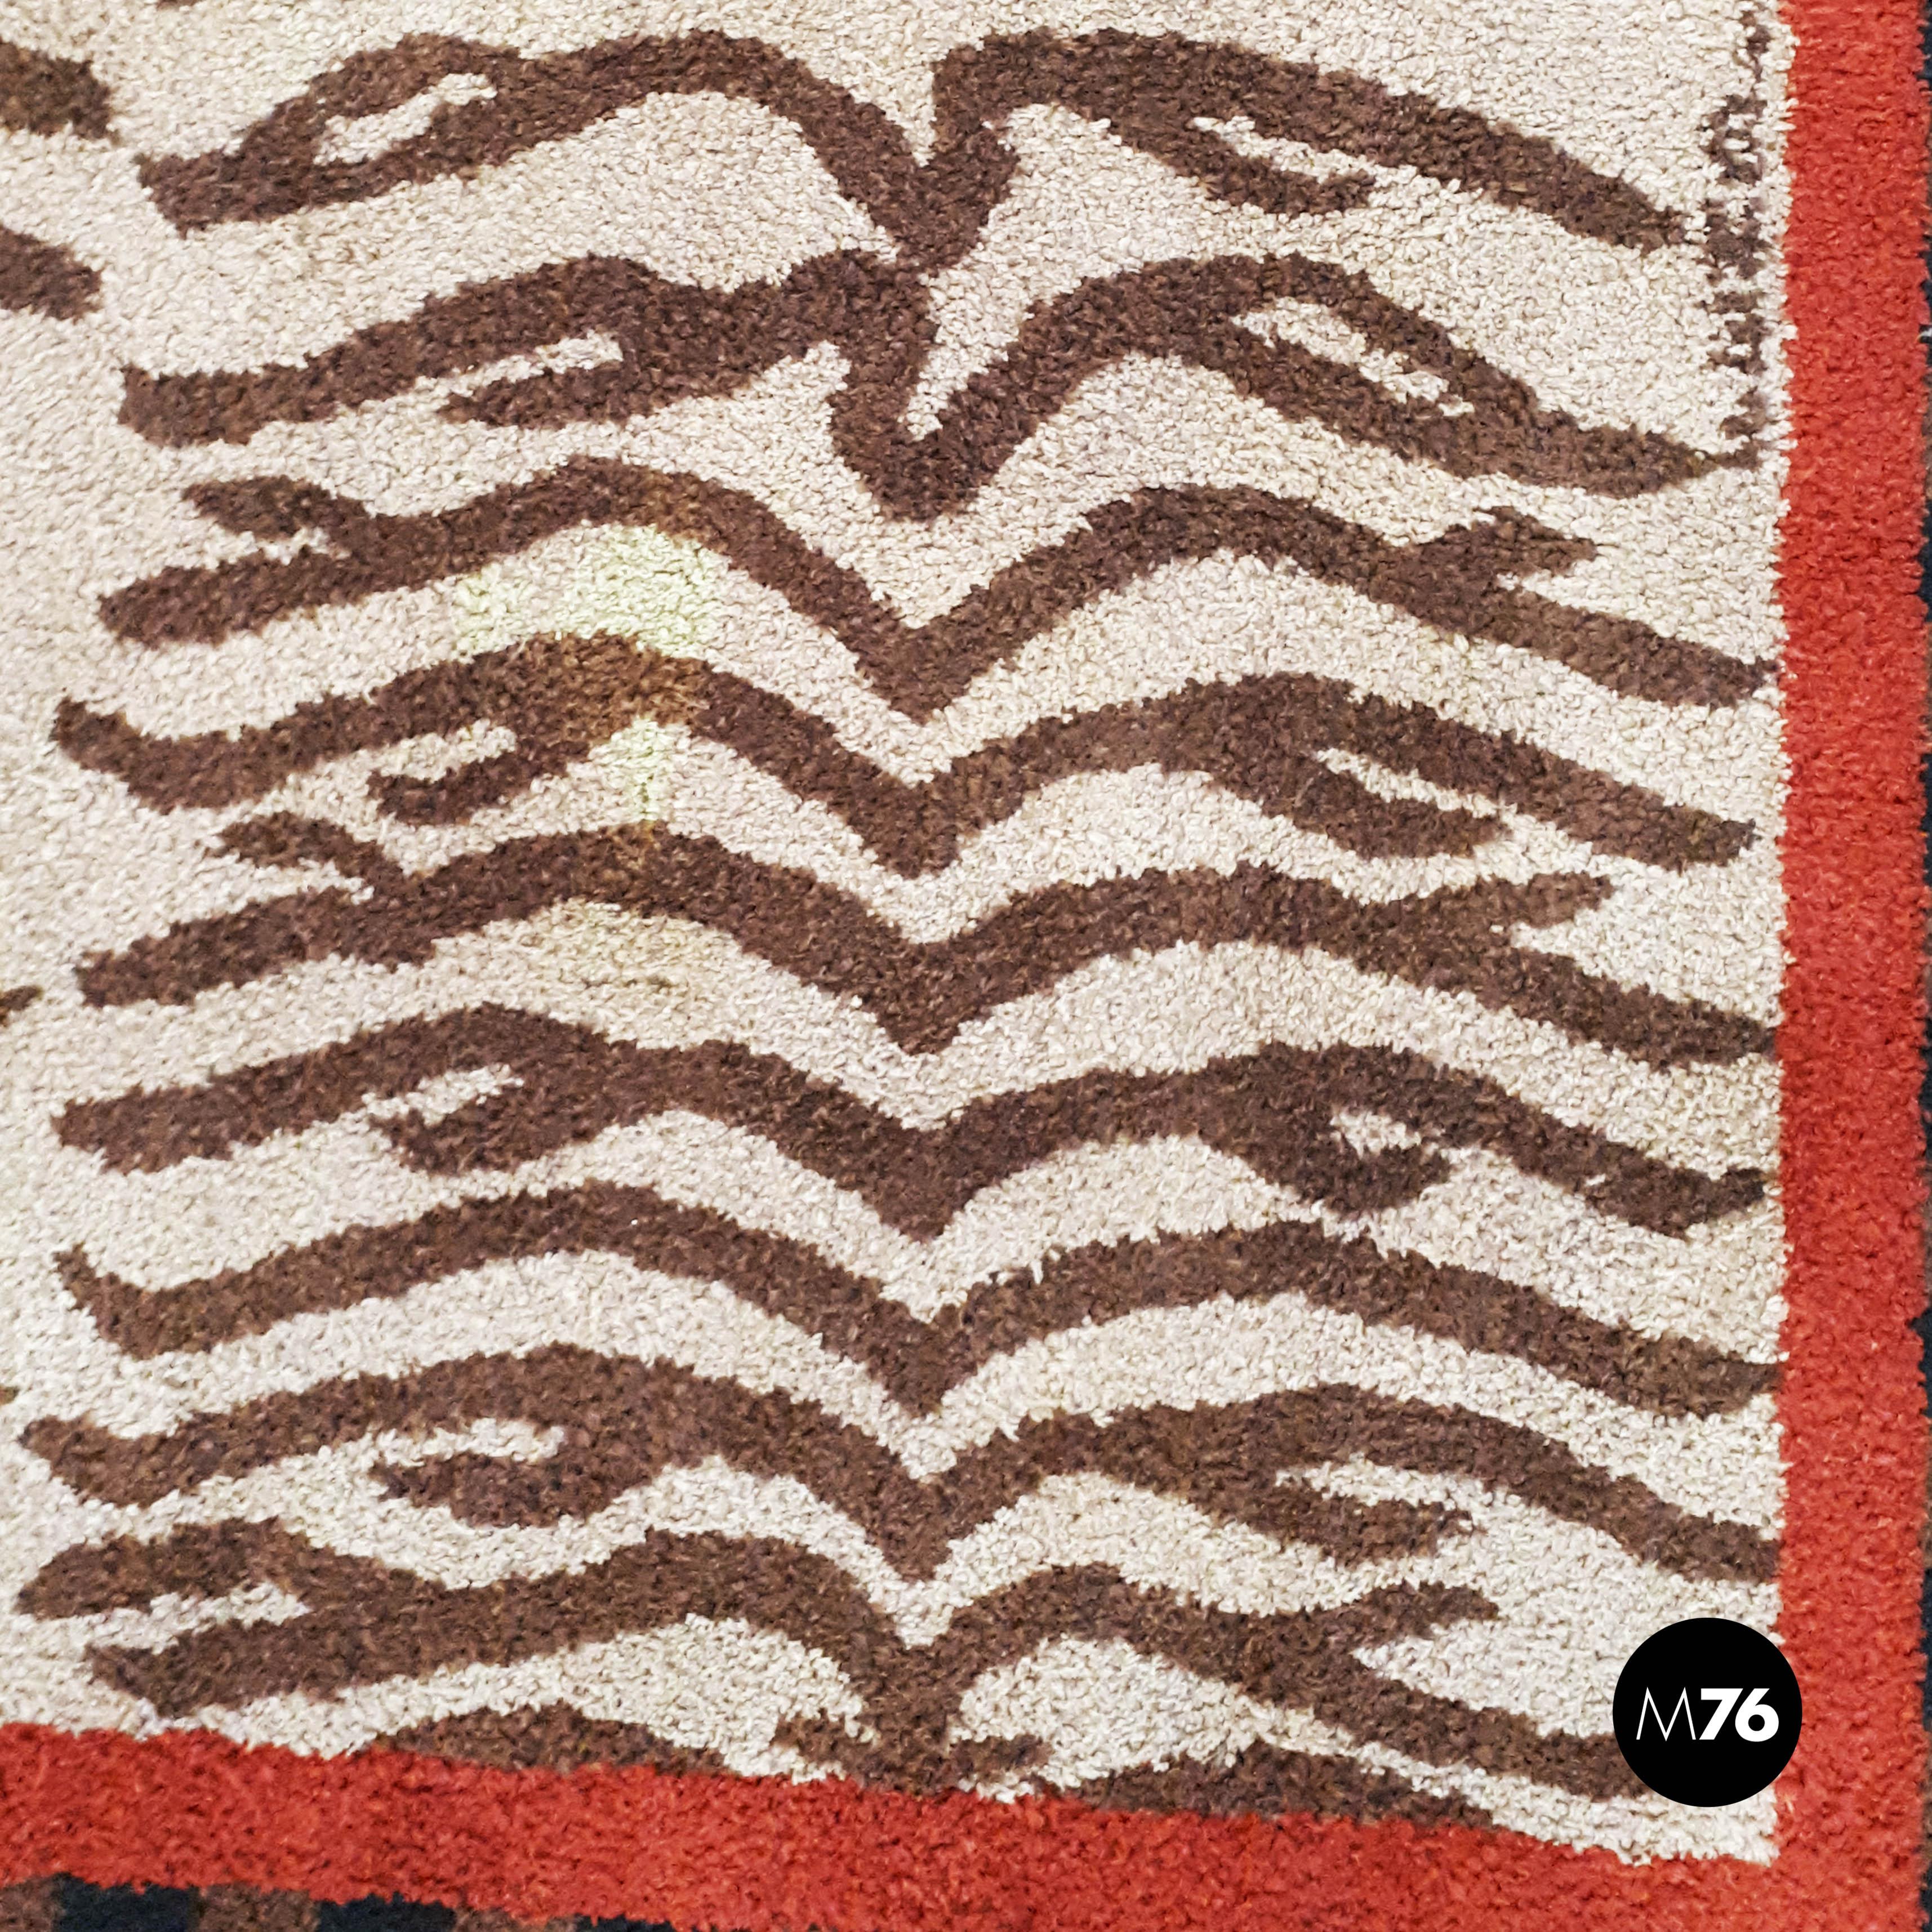 Italian short pile Fendi carpet, 80s
Brown and beige zebra striped short pile carpet with red and black details from Fendi, 1980s.

On the corners there is the logo in red.

Good conditions, it has small cuts.

Measurements 239x165 cm.